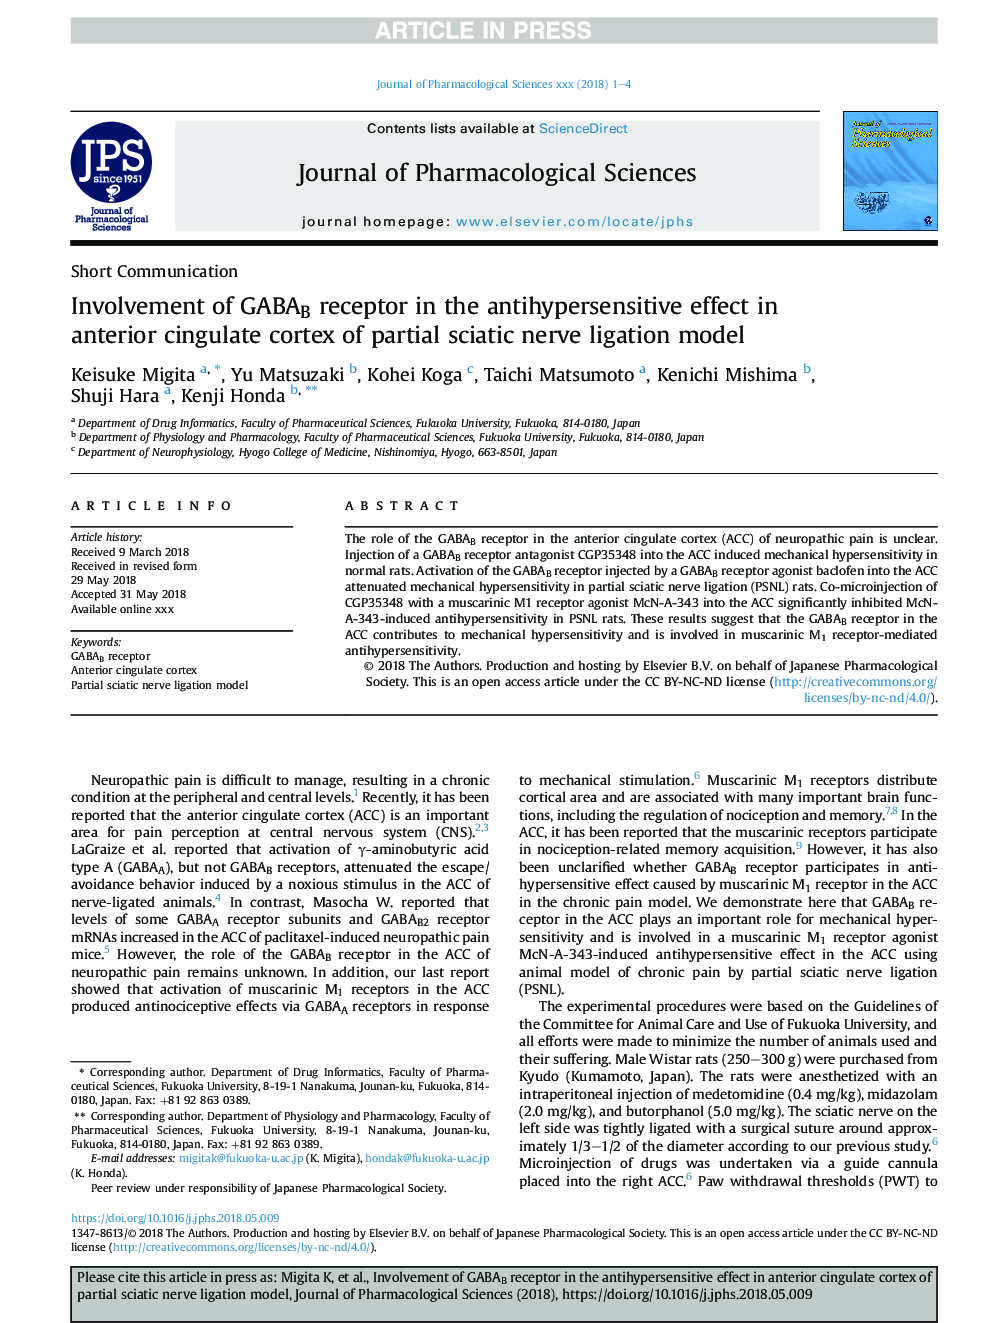 Involvement of GABAB receptor in the antihypersensitive effect in anterior cingulate cortex of partial sciatic nerve ligation model